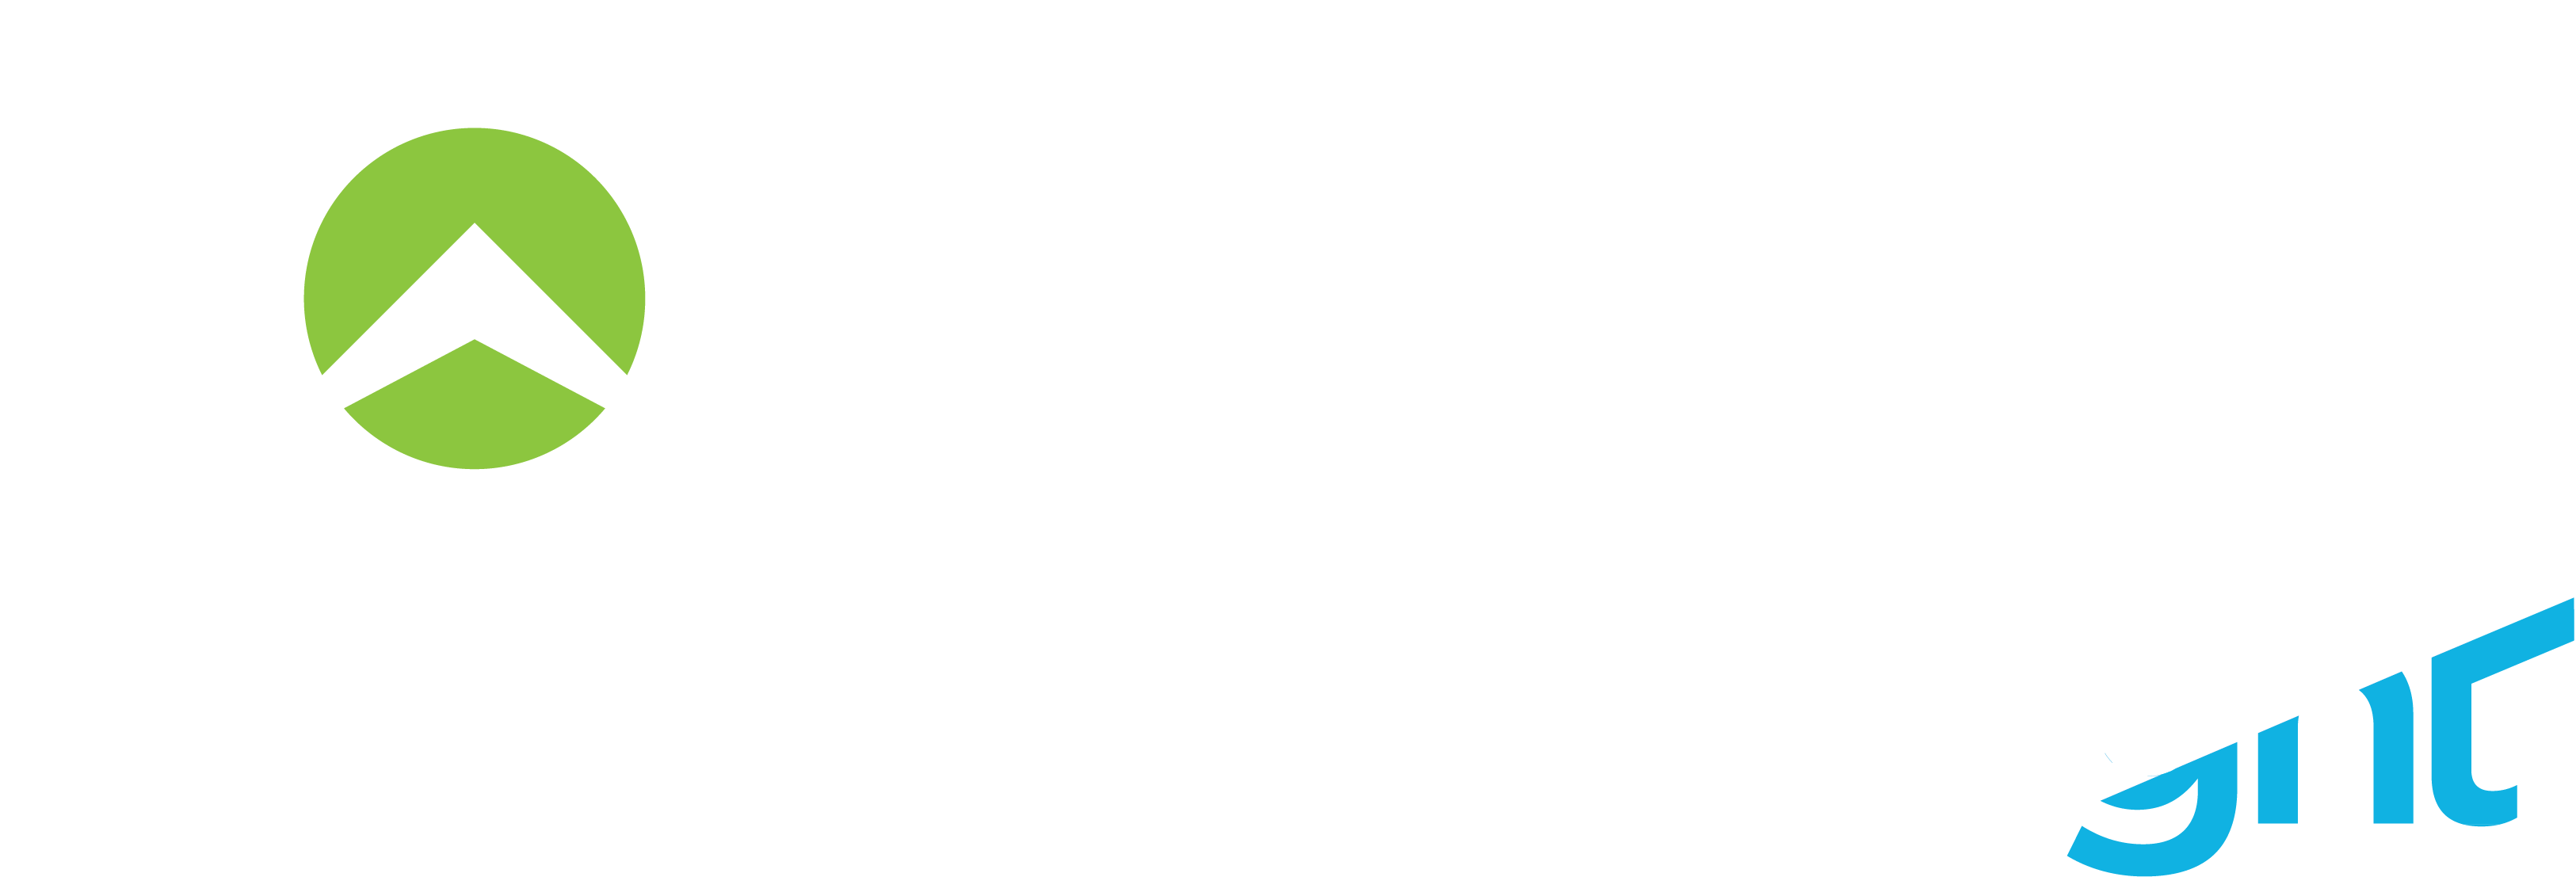 Northpass by Gainsight Logo